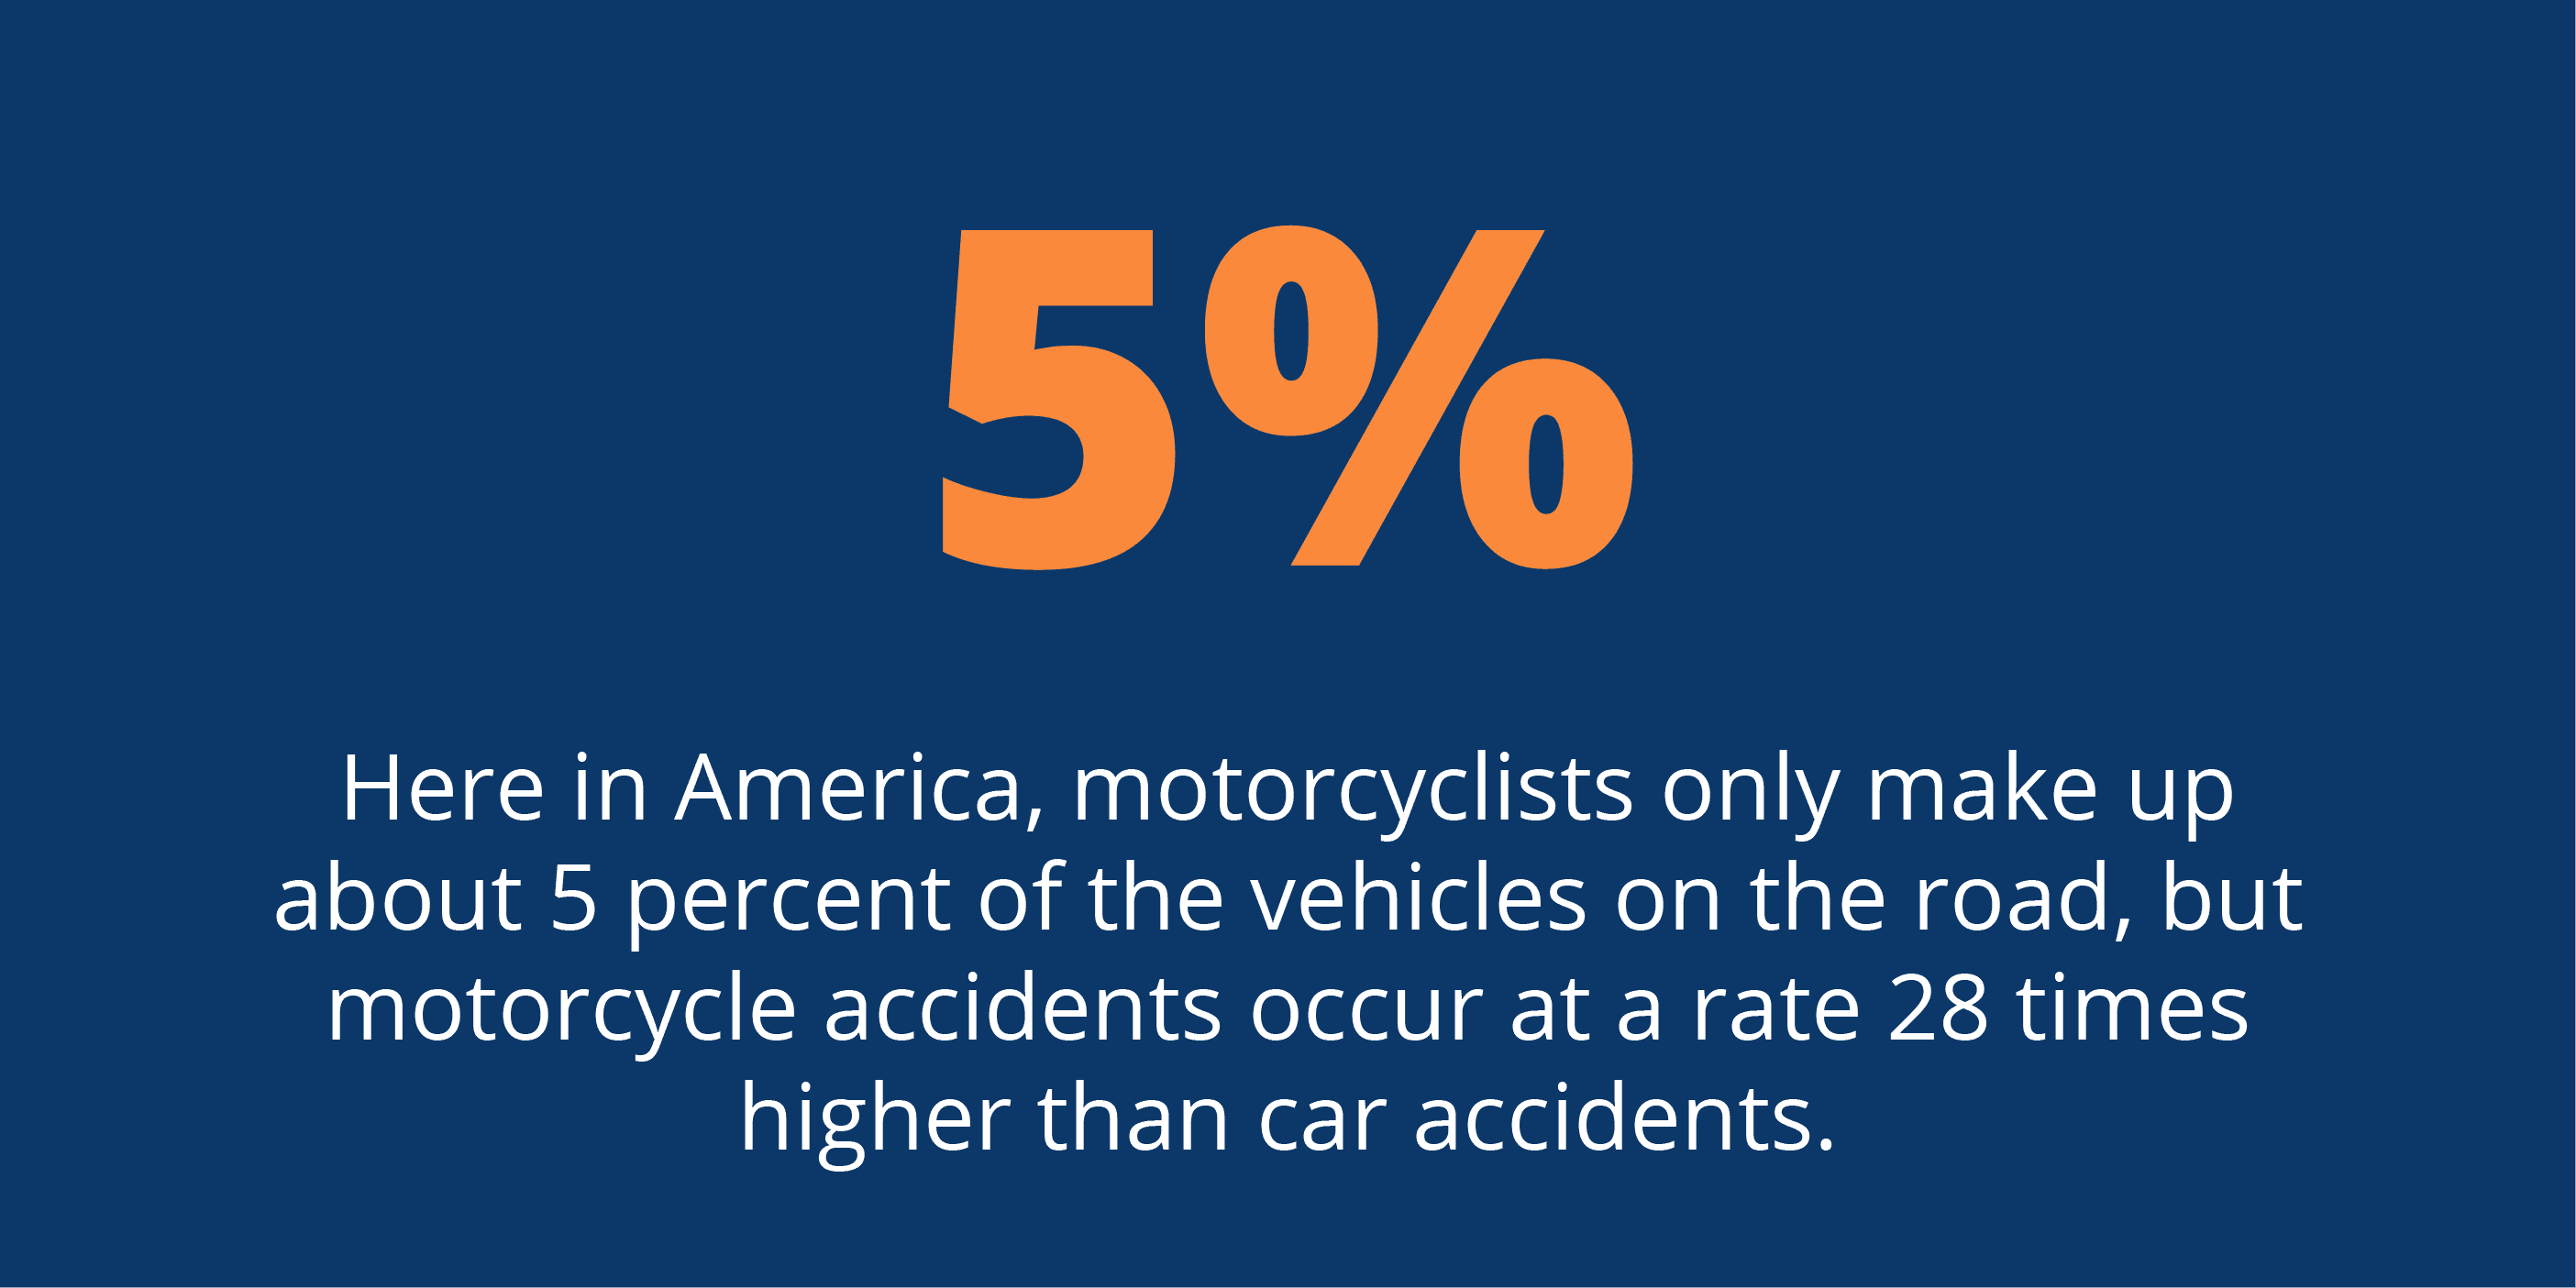 Motorcycle-accidents-occur-at-a-rate-28-times-higher-than-cars.